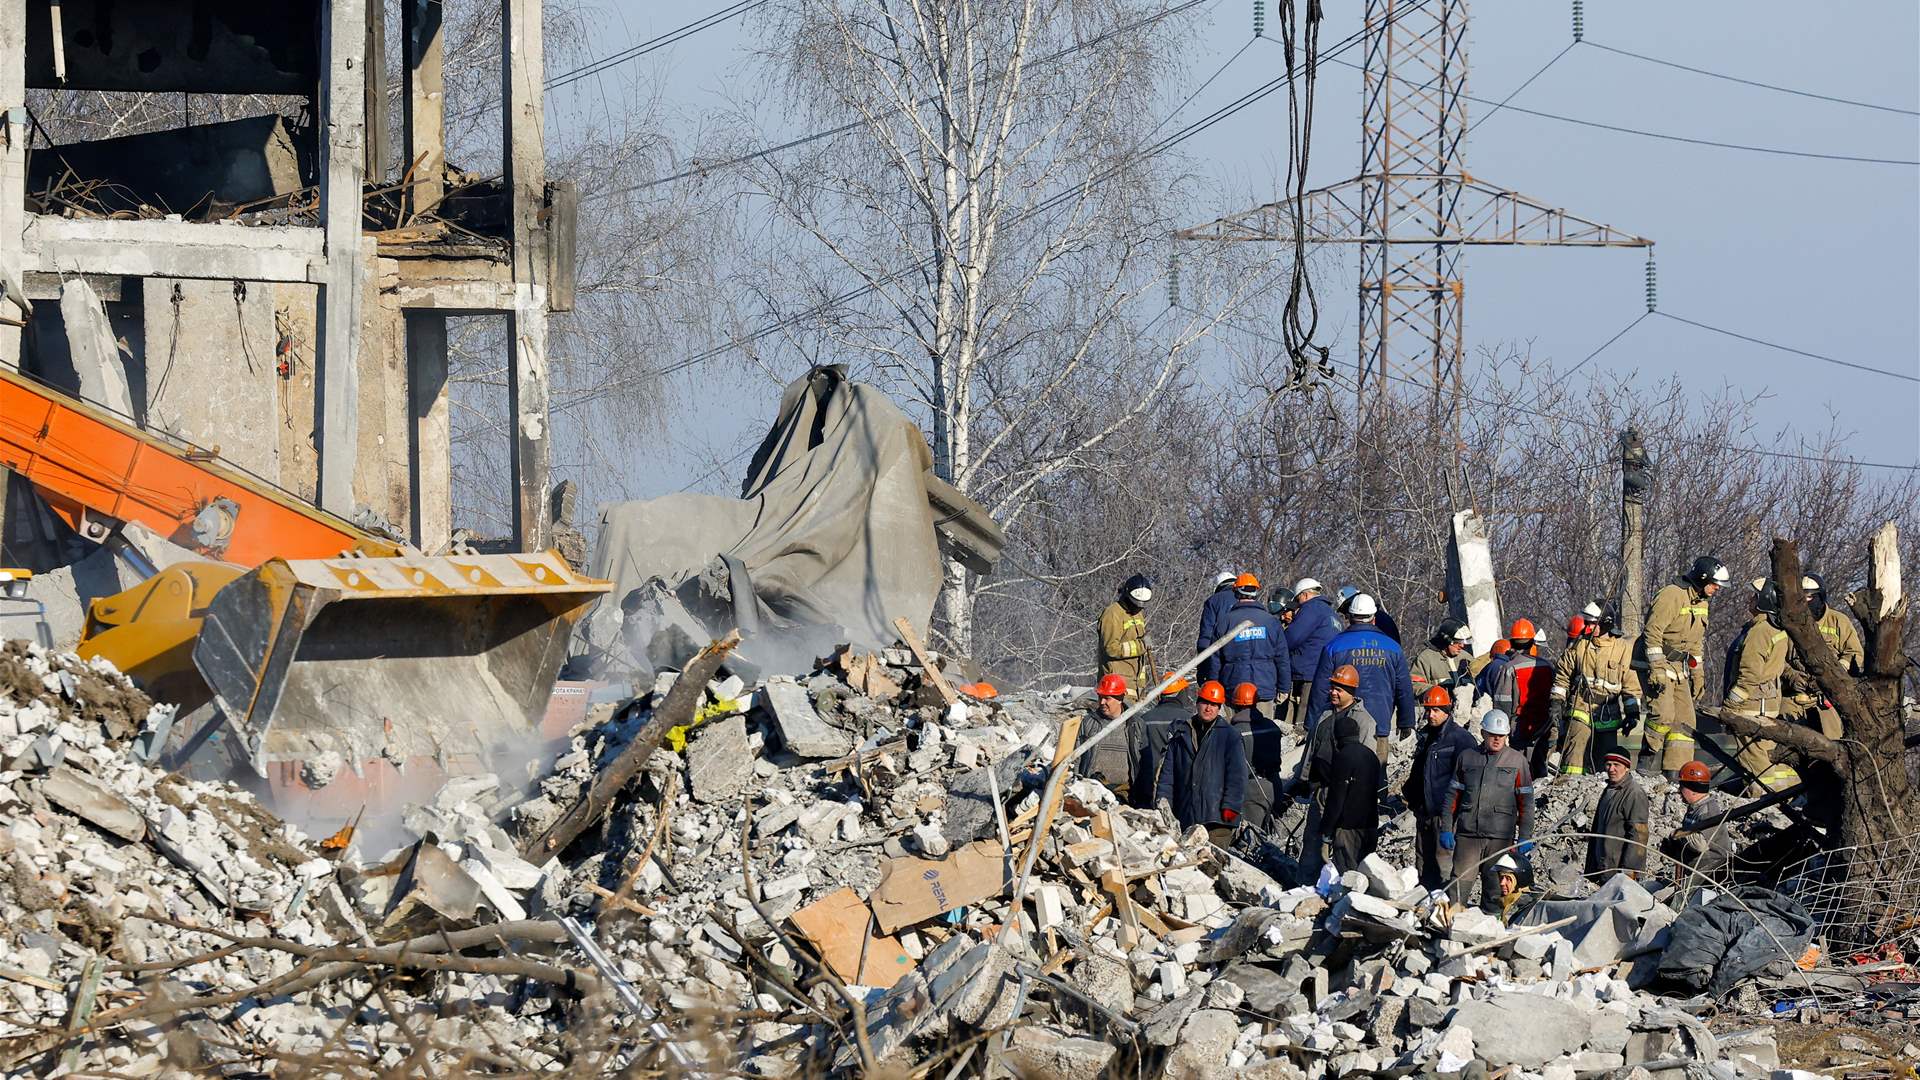 One Dead and 41 Injured in Ukrainian Shelling Targeting the Russian-Occupied City of Makiivka